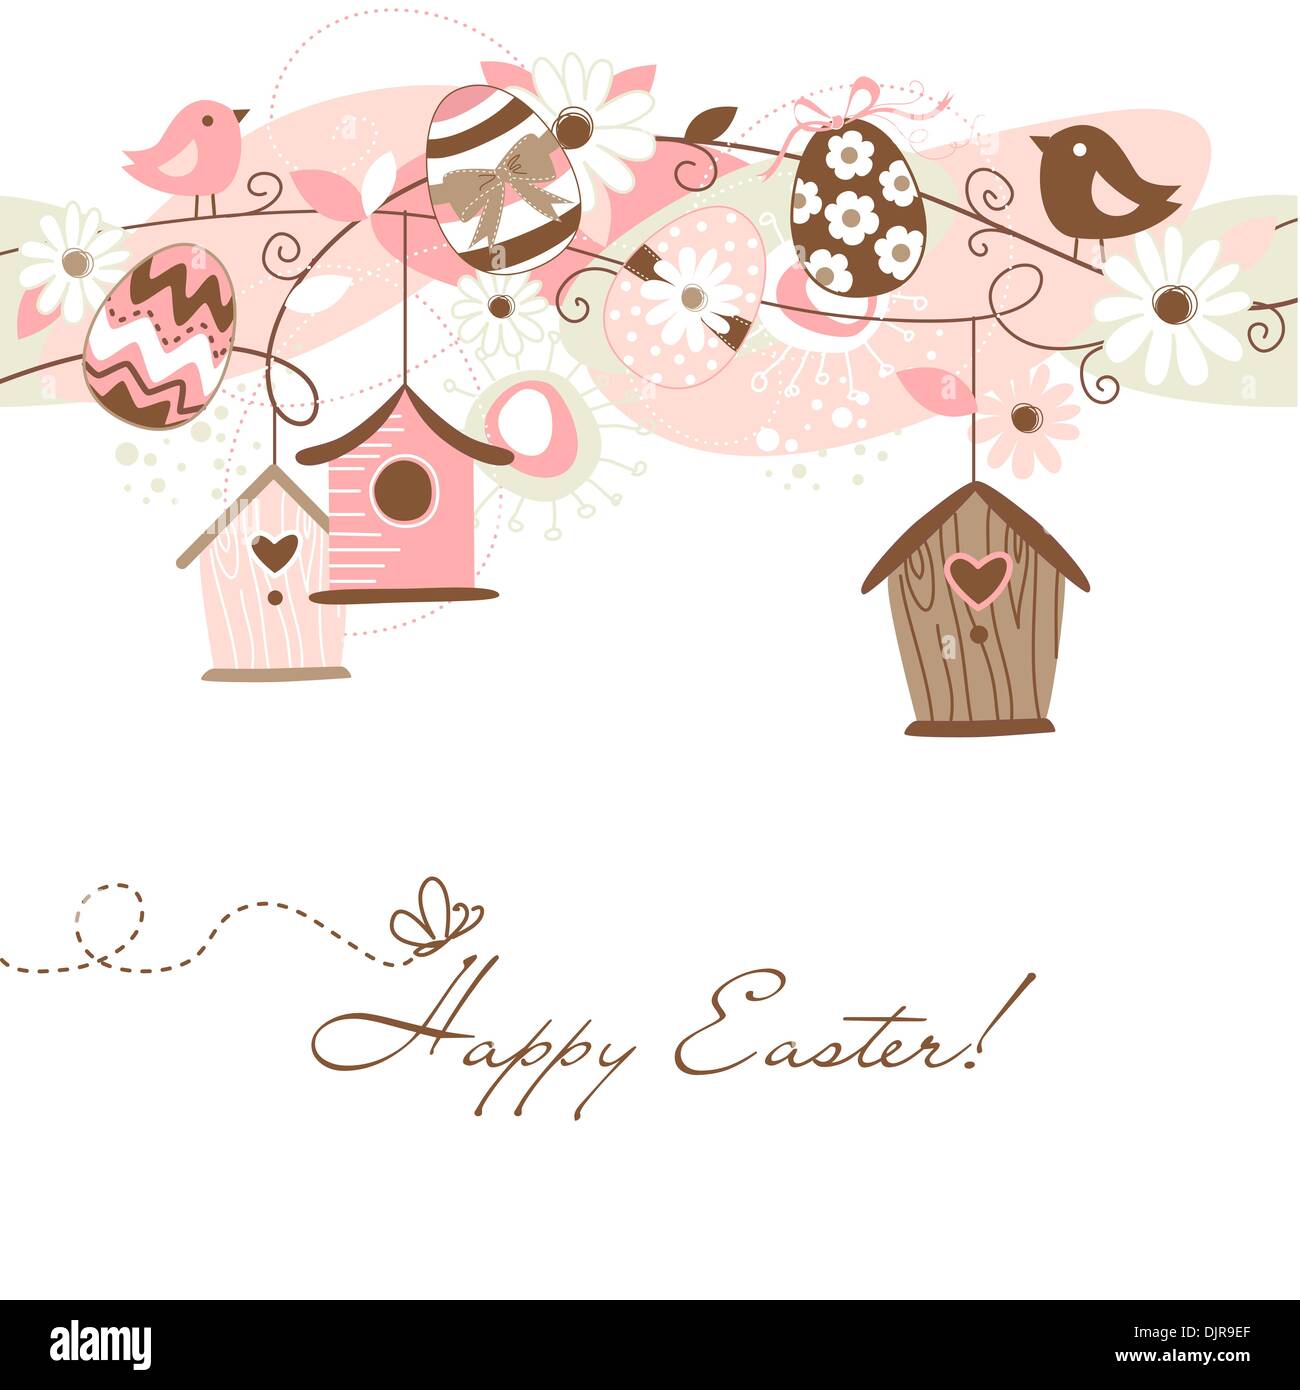 Beautiful Spring backgroun with bird houses, birds, eggs and flowers Stock Vector